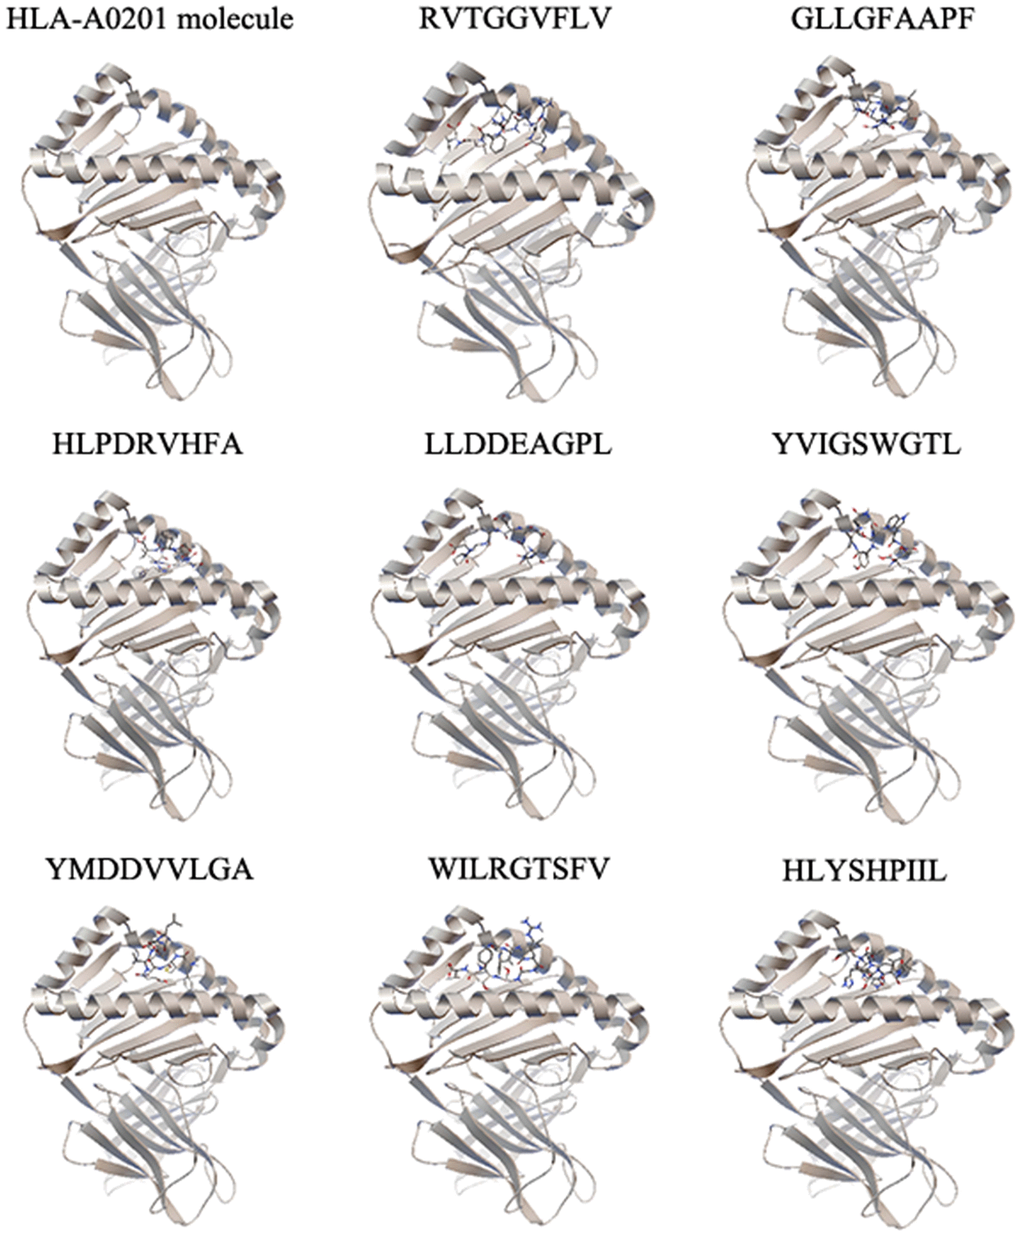 The molecular docking results of each epitope. Each epitope binds to the groove of the HLA-A0201 molecule between the α1 and α2 domains, which is shown by secondary structure. One representative of five independent experiments is shown.